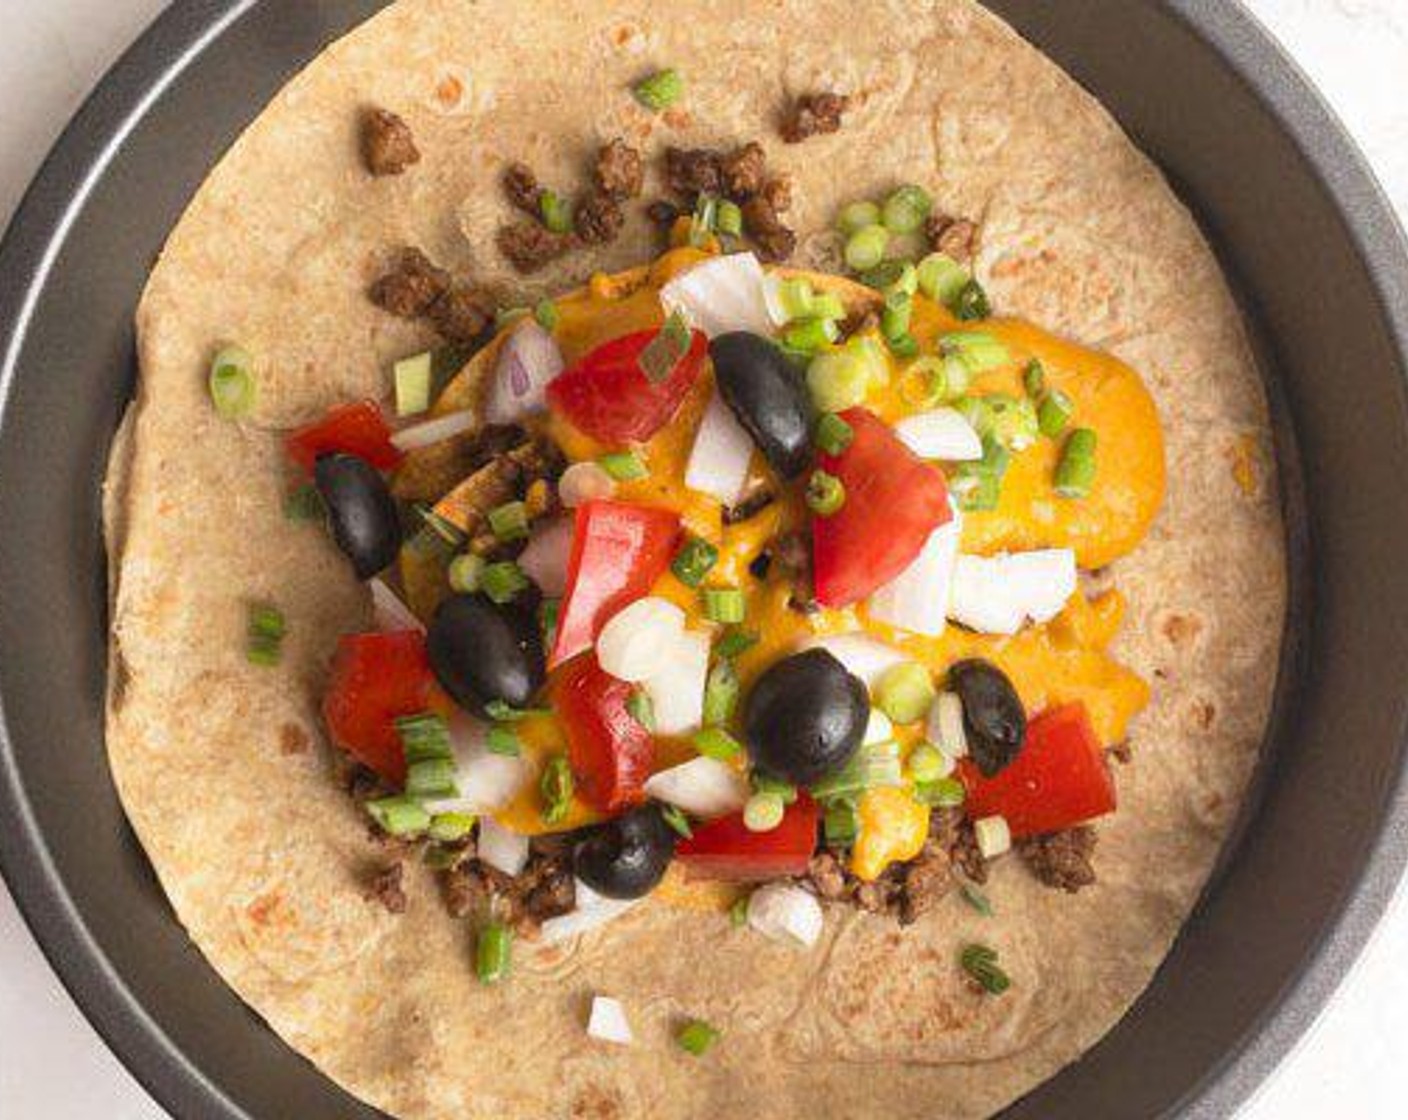 step 2 Add Vegan Ground Beef (1/2 cup), Tomato (1/4 cup), White Onion (1/4 cup), Fresh Chives (1 stalk), Black Olives (to taste), Vegan Nacho Cheese Sauce (1/2 cup) to the middle of the Whole Wheat Tortilla (1) and fold close as best you can.